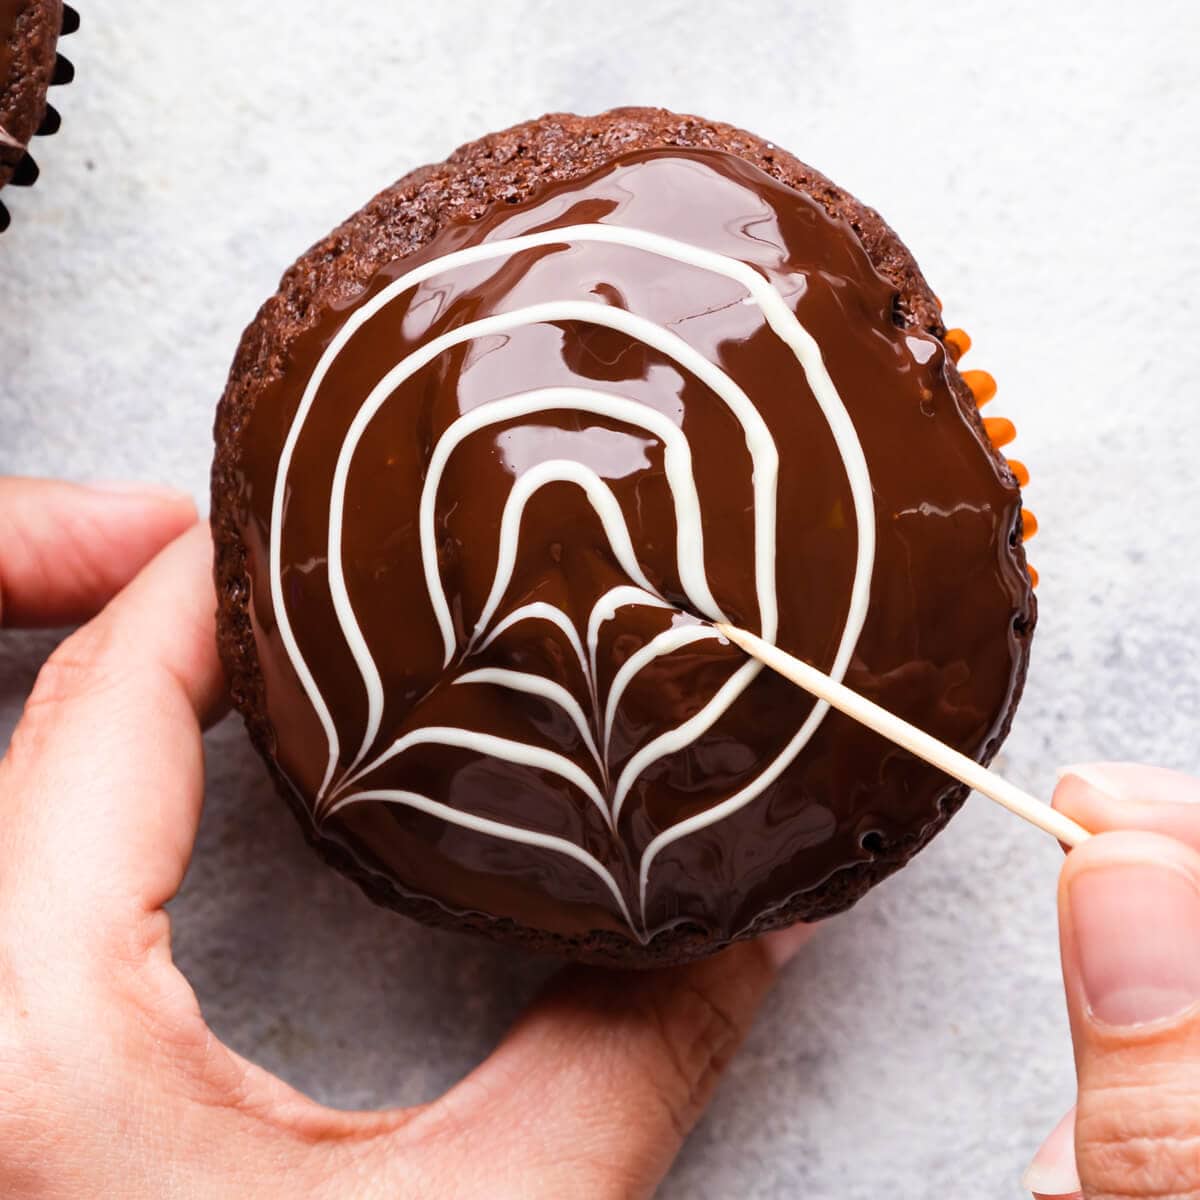 chocolate muffin being decorated with toothpick to create spiderweb design.